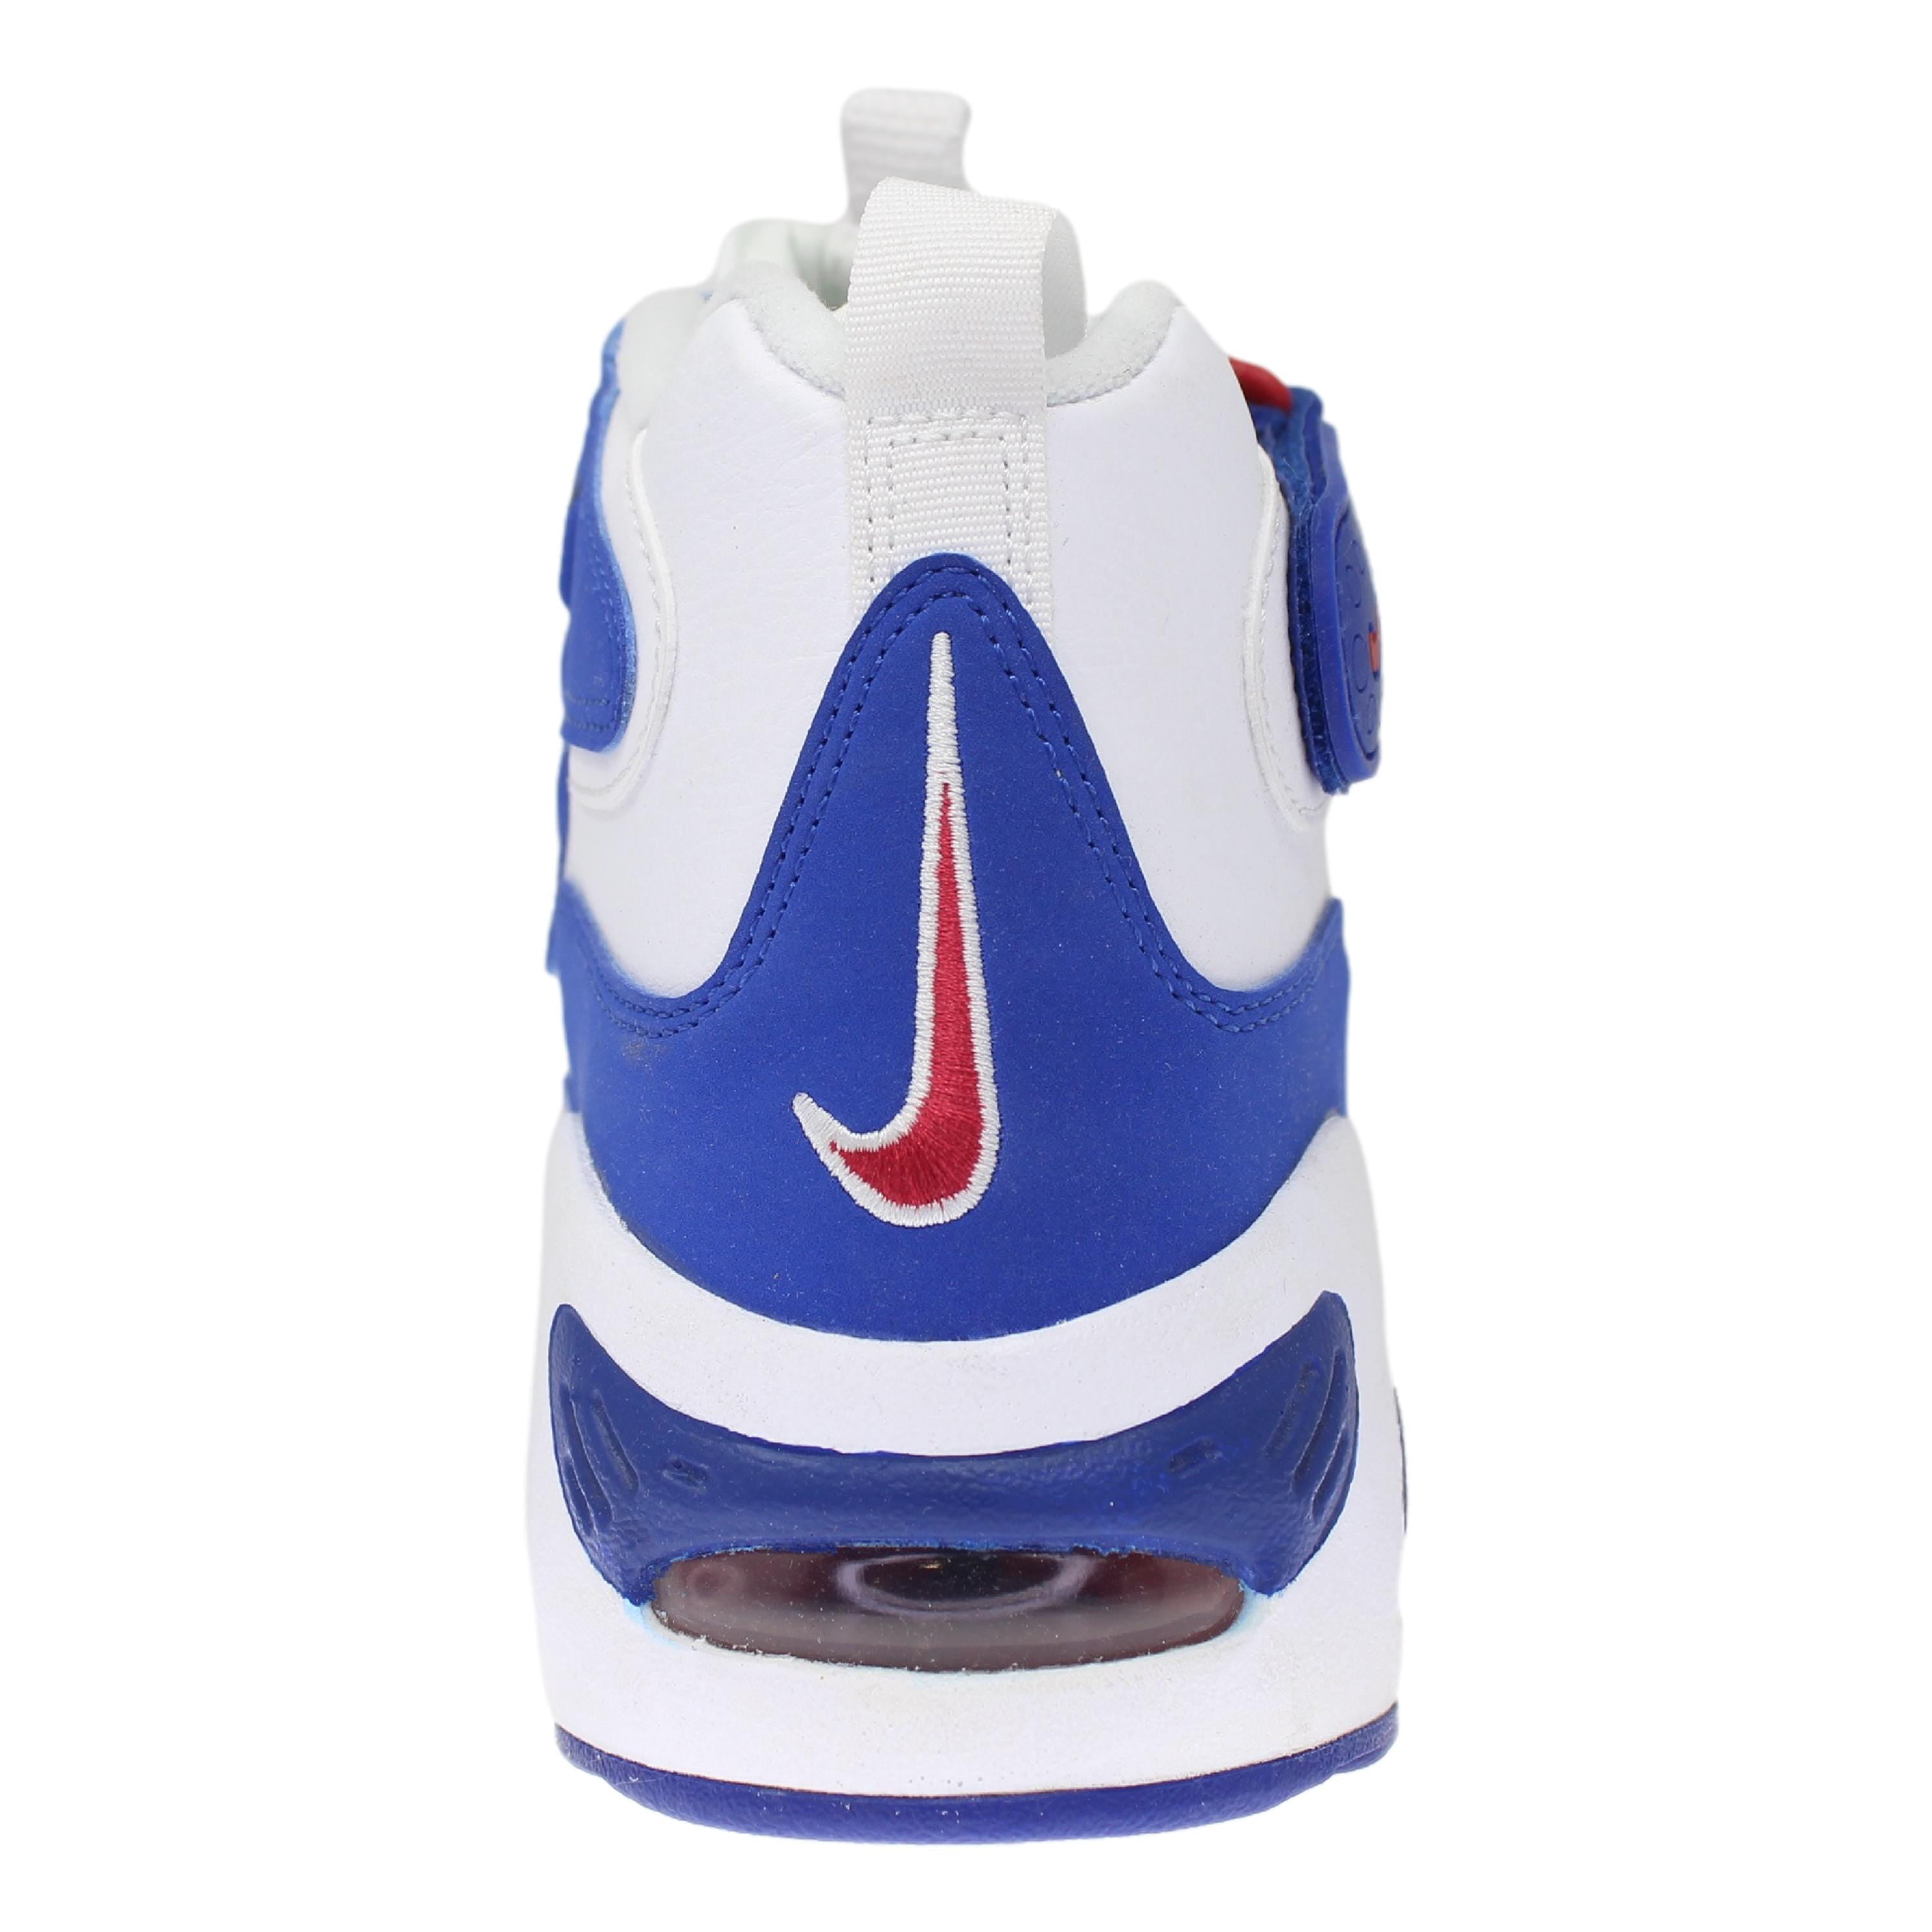 Nike Air Griffey Max 1 White/Old Royal-Gym Red DX3723-100 Men's